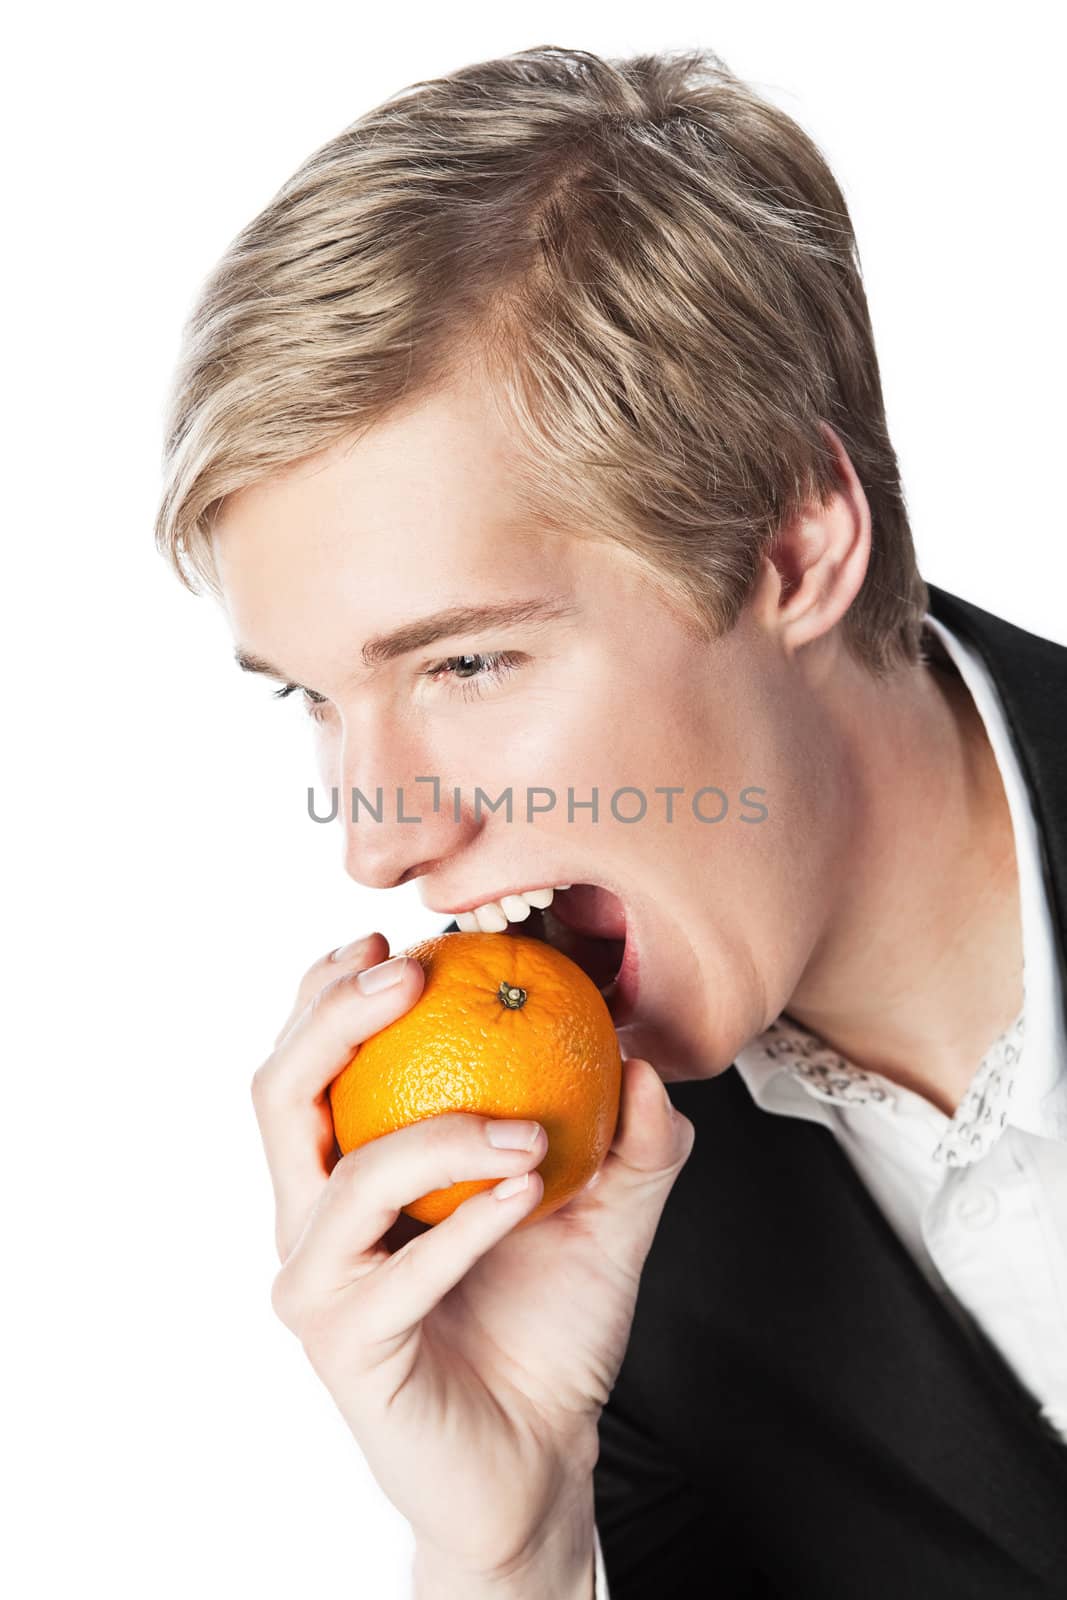 Smiling young handsome blond man biting an orange